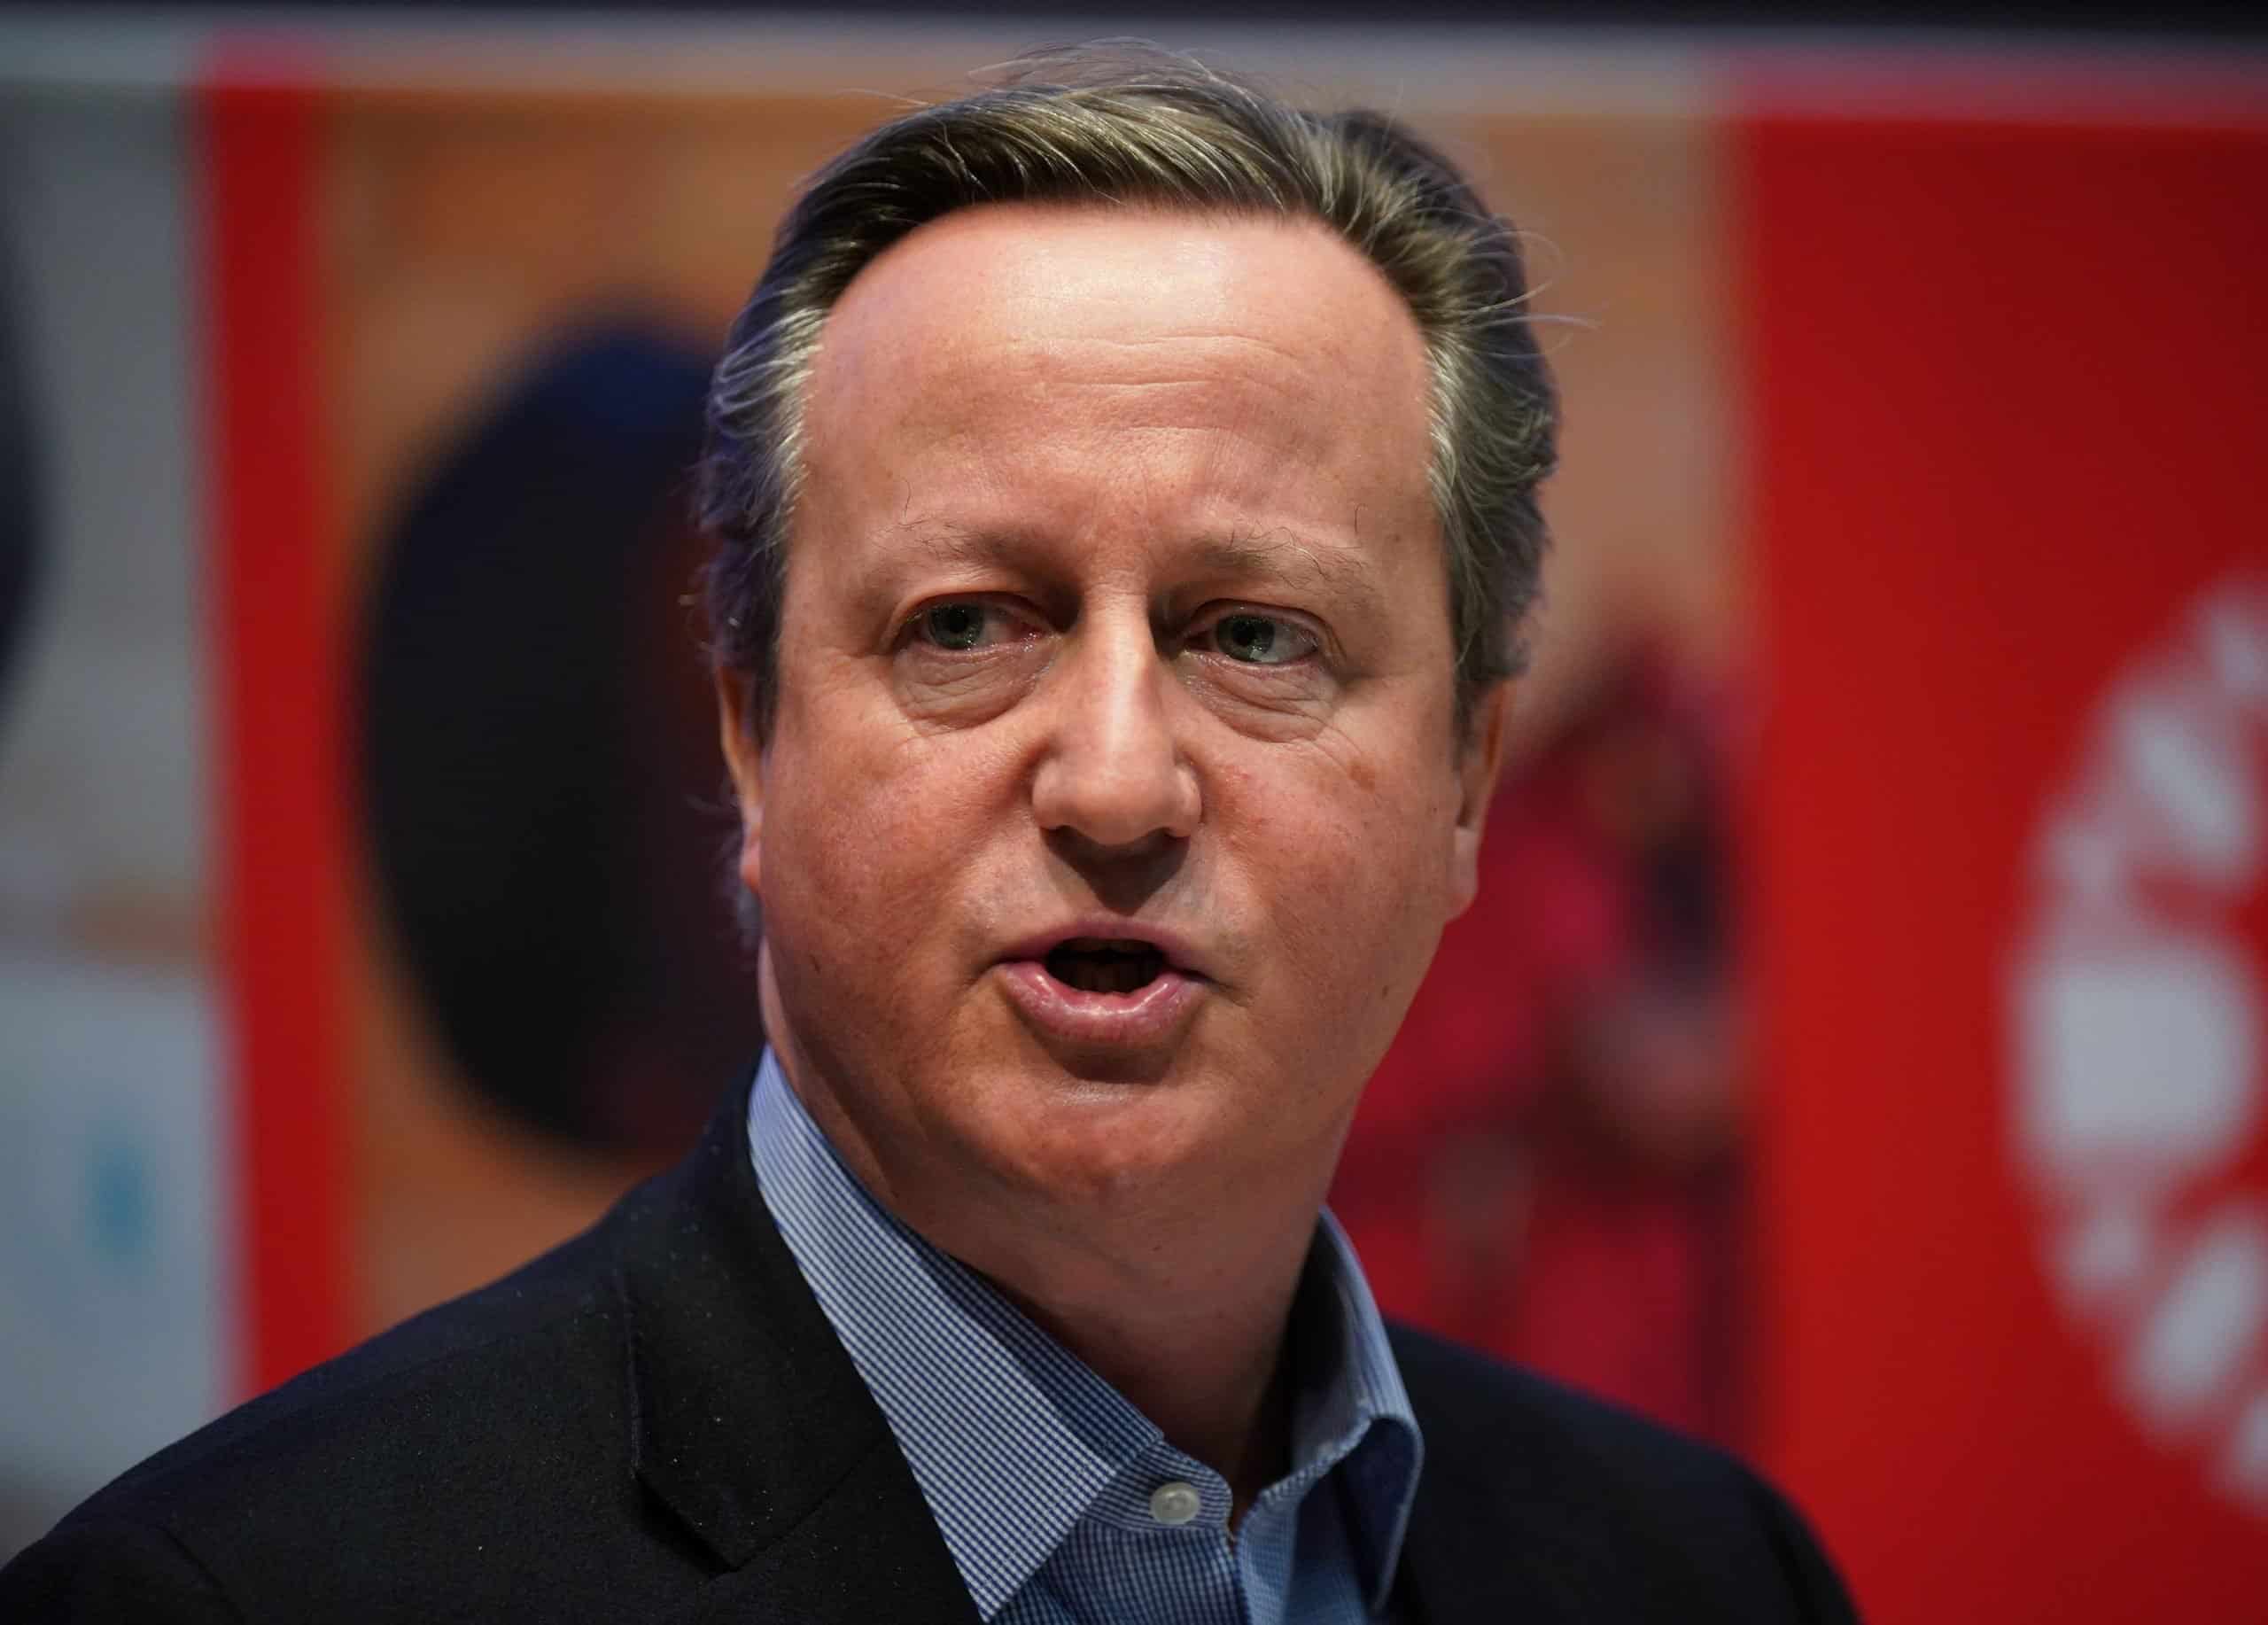 UK will continue allowing arms exports to Israel – Cameron